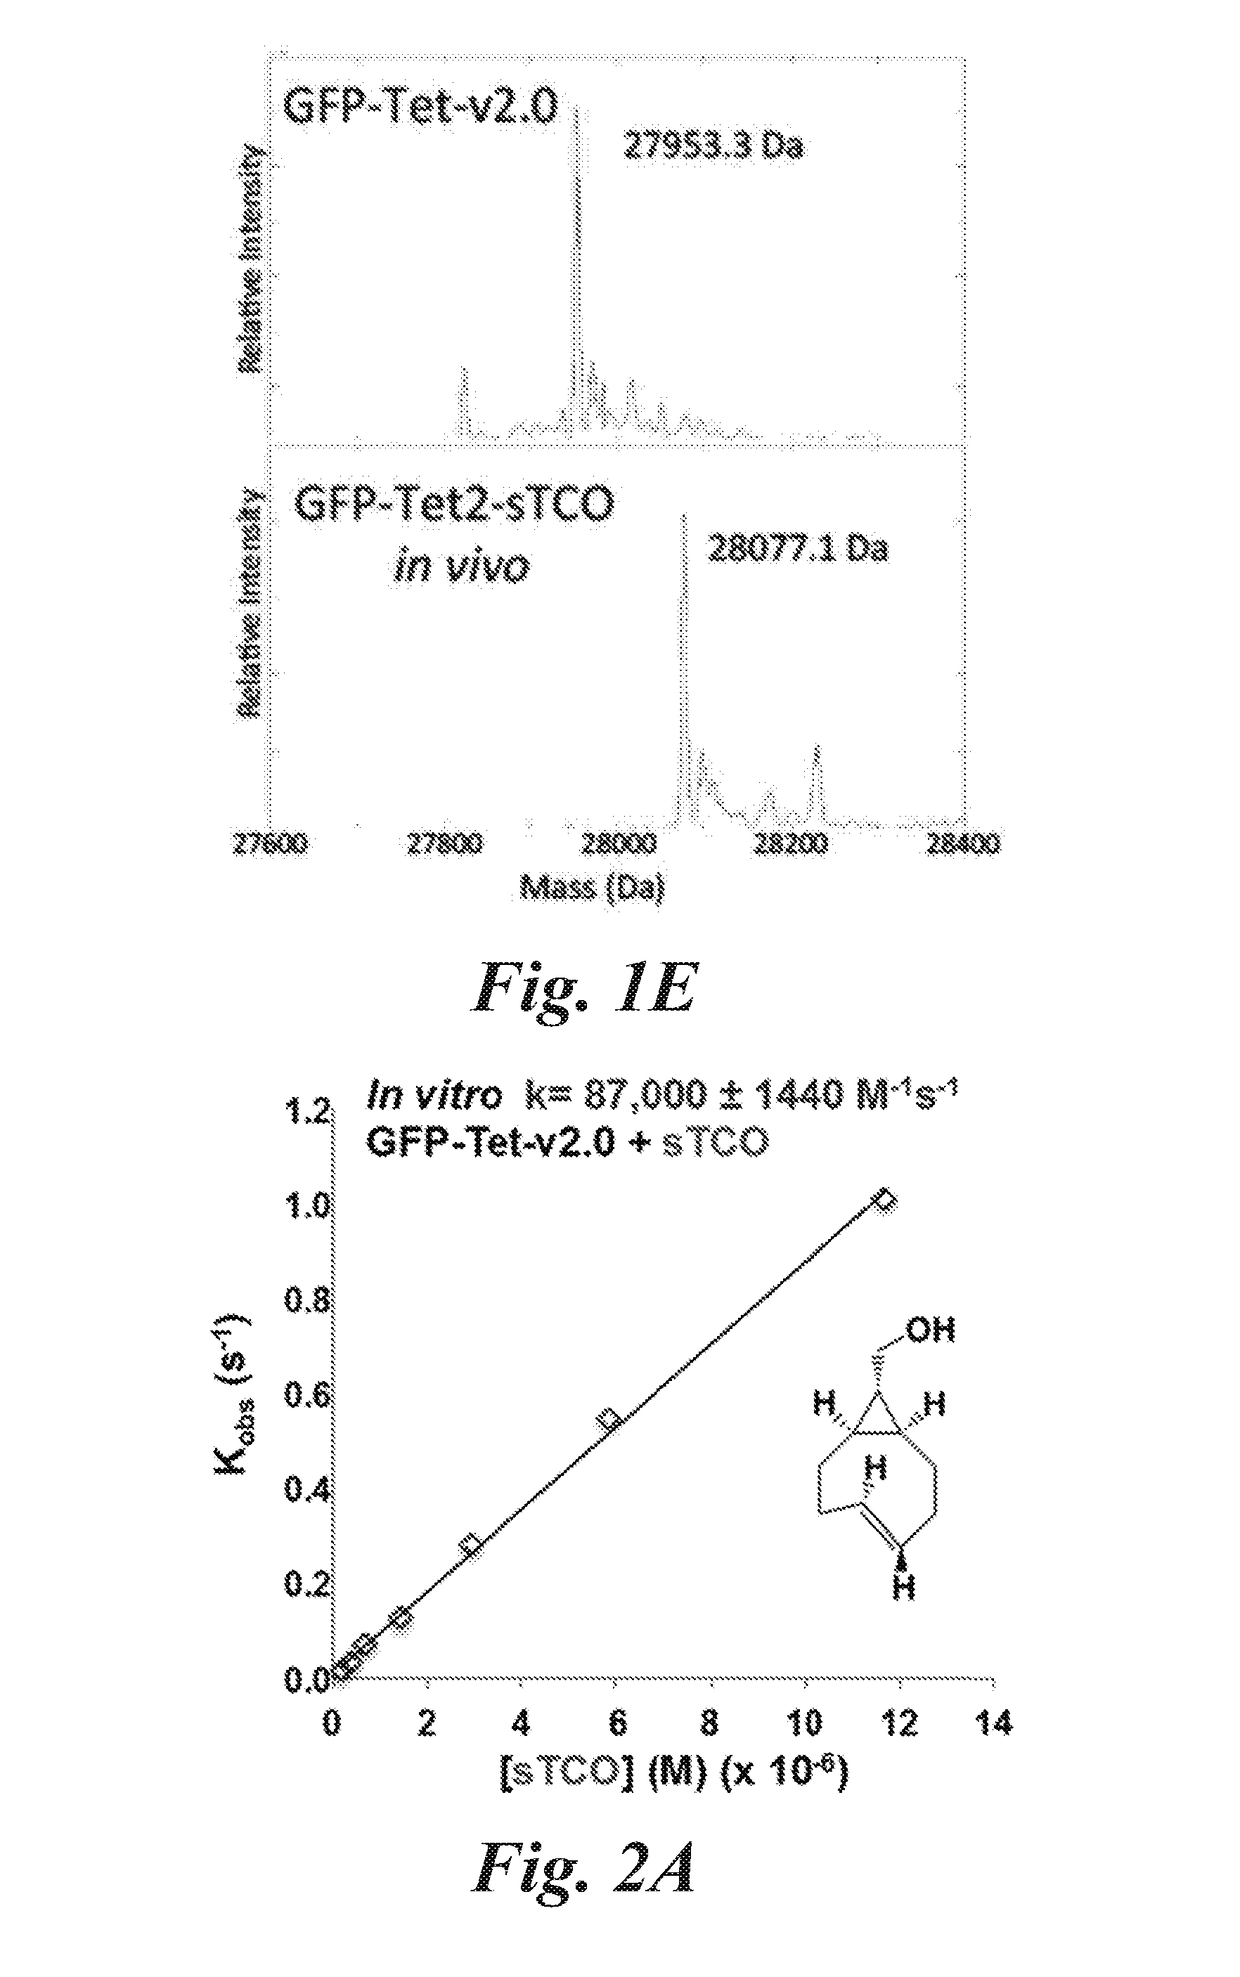 Reagents and methods for bioorthogonal labeling of biomolecules in living cells